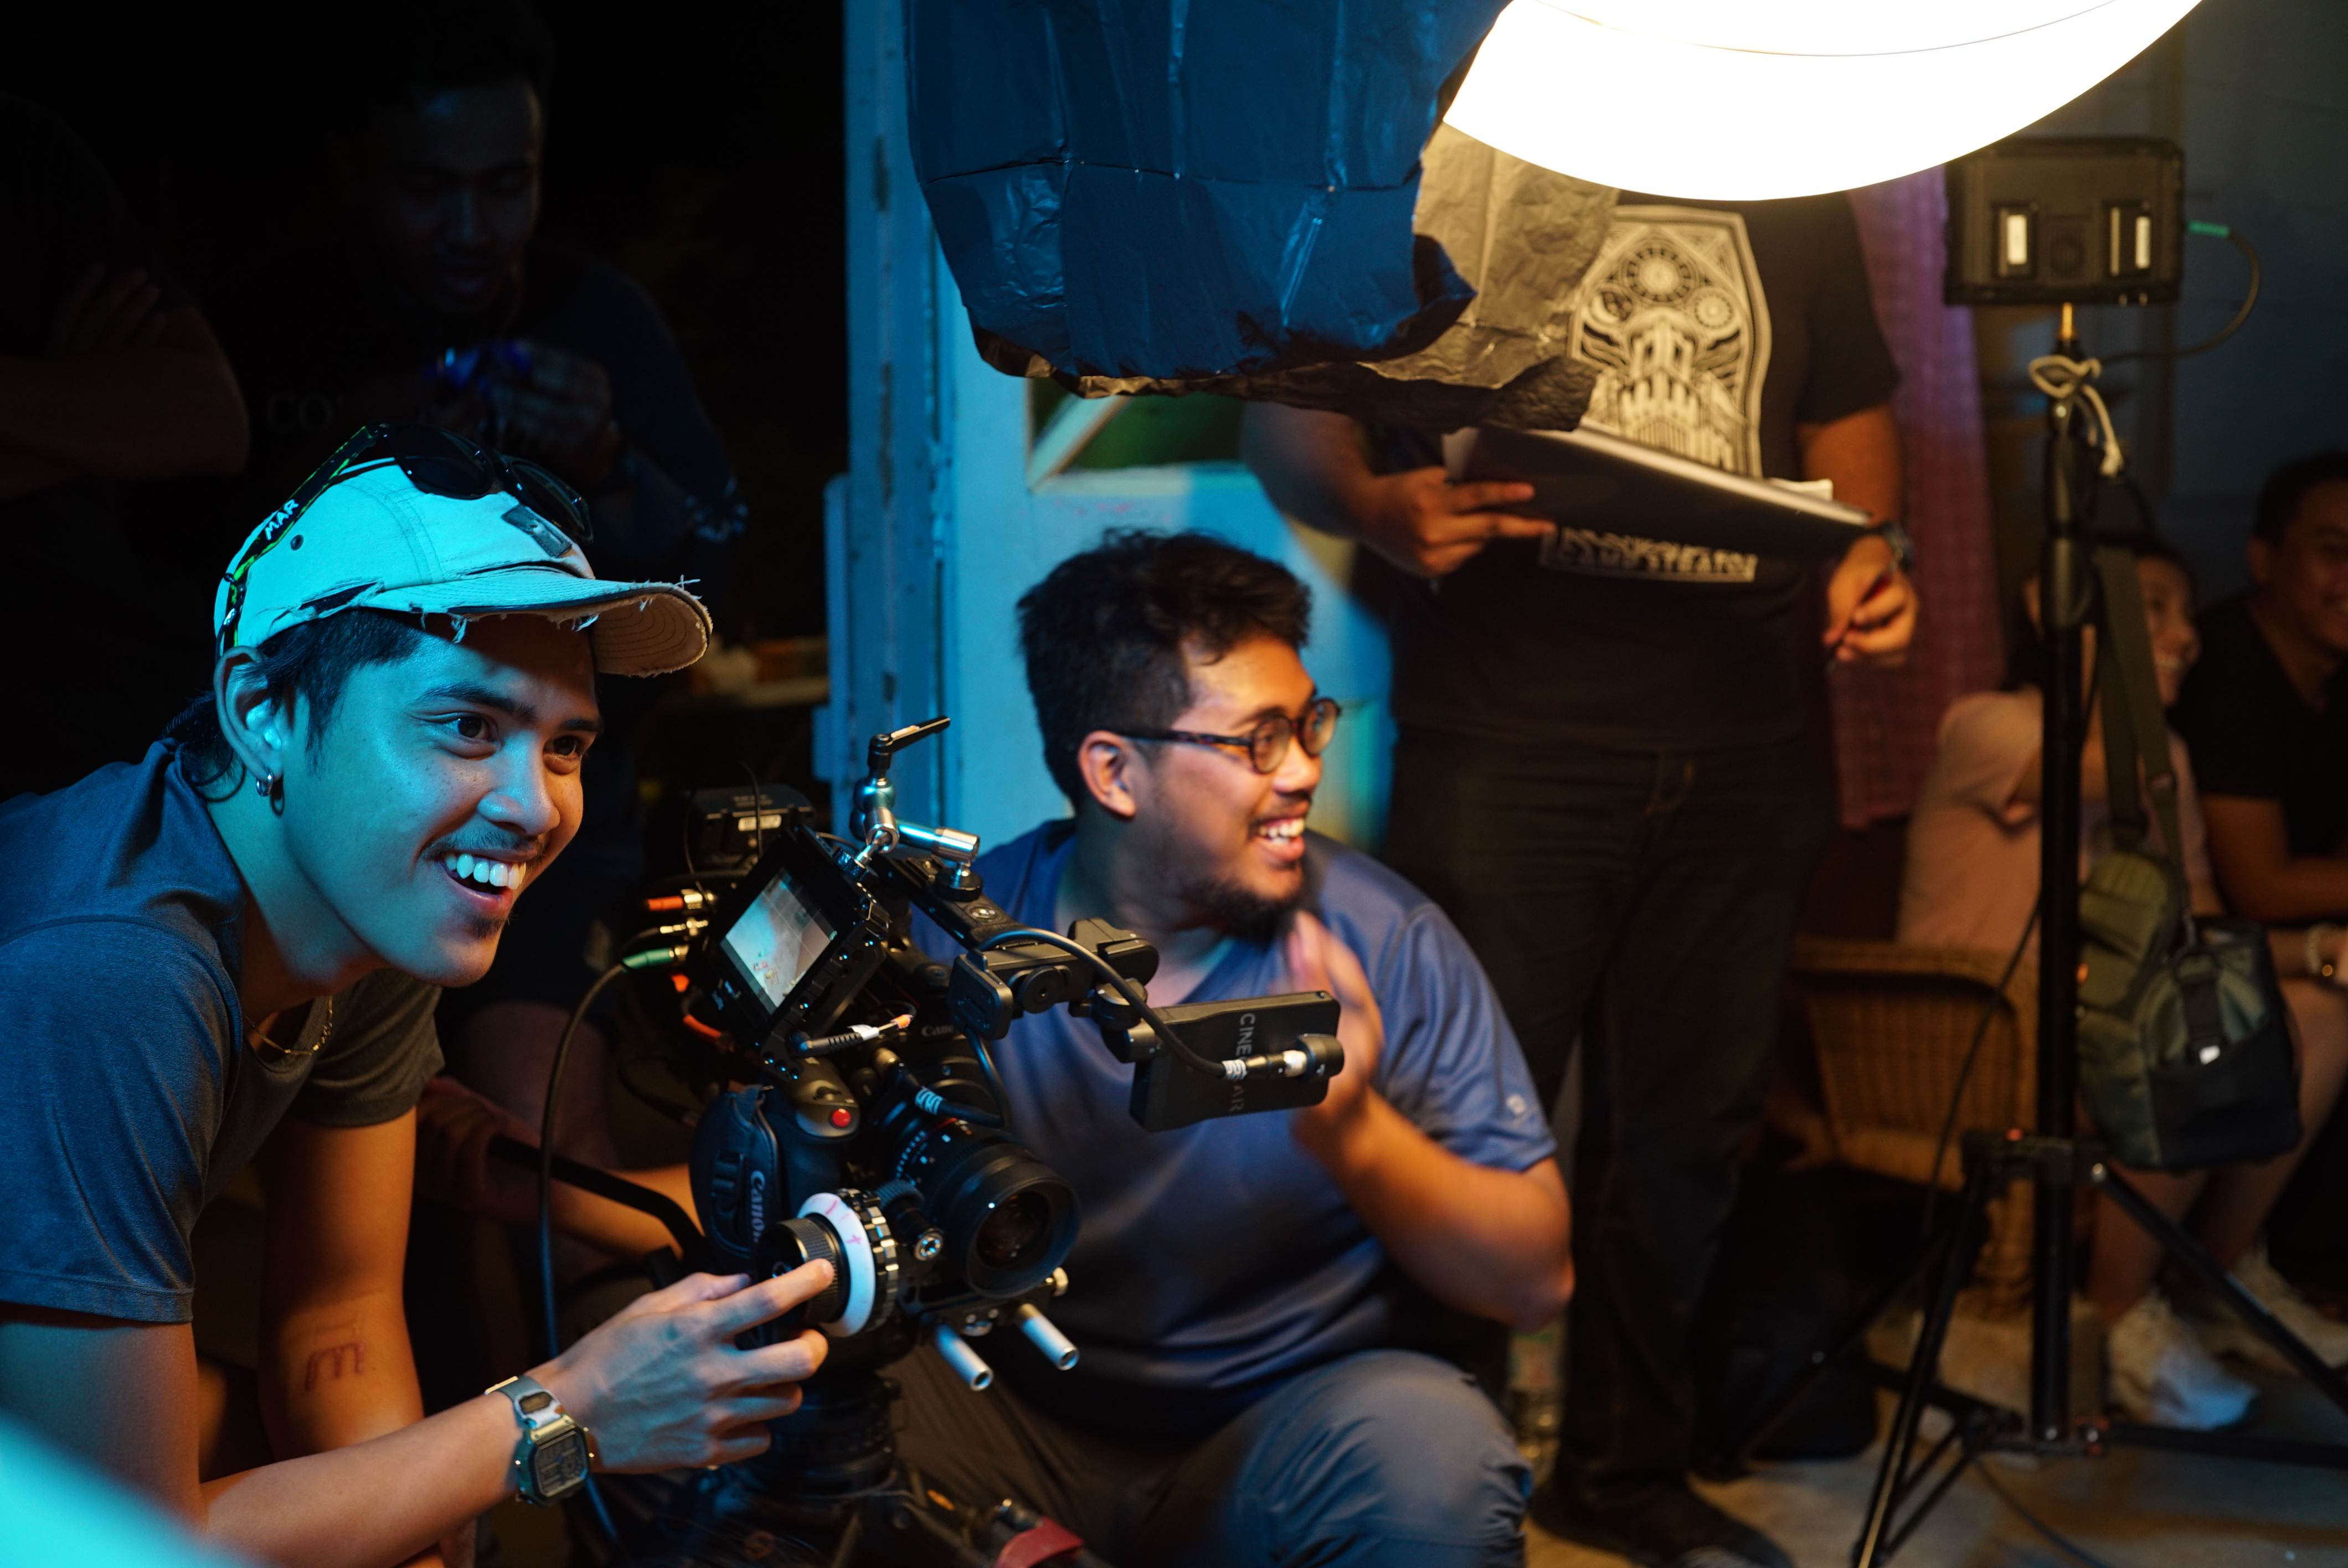 Ammar (front) working as a Camera Assistant on the set of ‘Saka’, one of the Top 15 horror short films in Asia Scream Festival 2019. Photo credit: Infidow Pictures